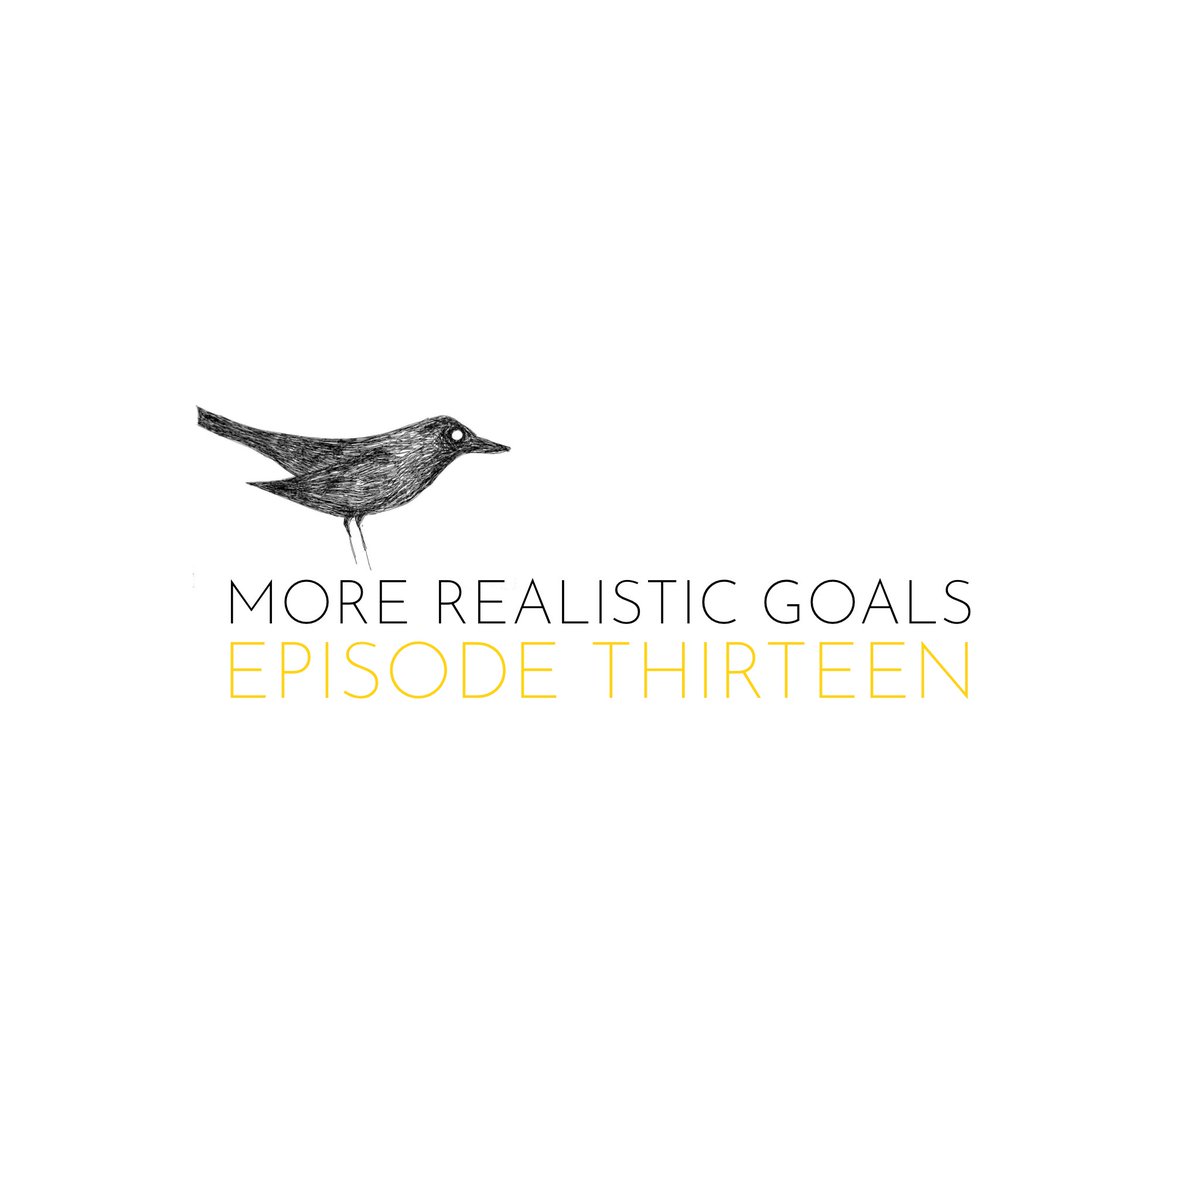 There's another chance to listen to the latest MORE REALISTIC GOALS at 6pm today on @ReformRadioMCR Feat. a guest mix from @BLKwBEAR1 + @brighthouse5 & @CuringtonMusArt, @ElizabethJelly, @armaturesmusic, @MartynAudio, @blackknoll, @thirdkindtapes & more! #MOREREALISTICGOALS